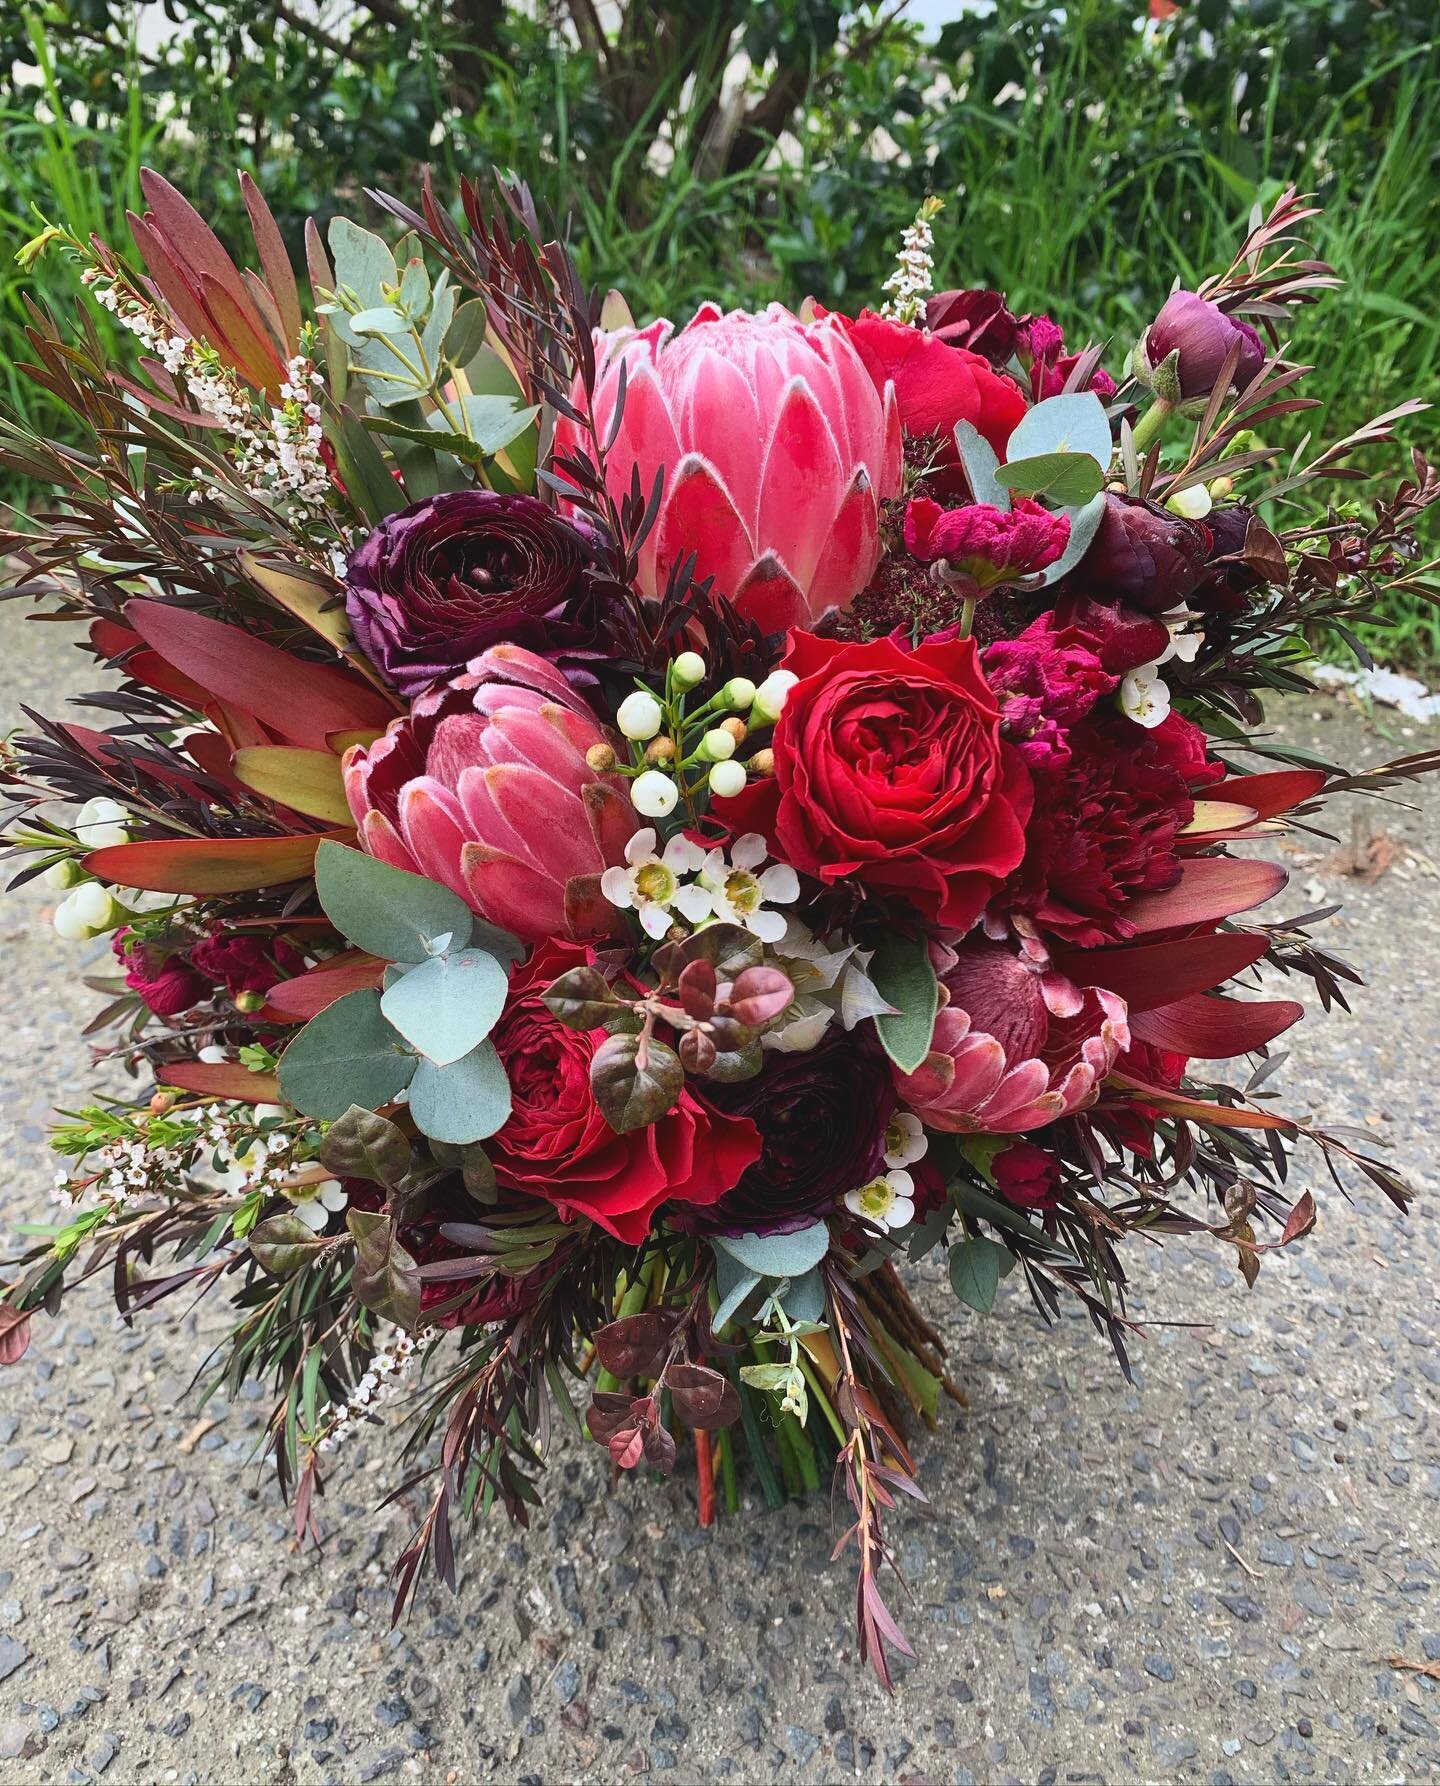 Spring has sprung and wedding season is back with a bang! It was so fun to be out and doing our thing with three weddings over the weekend! I mean check out the beautiful flowers in this burgundy and native inspired bouquet. As weddings usually fall 